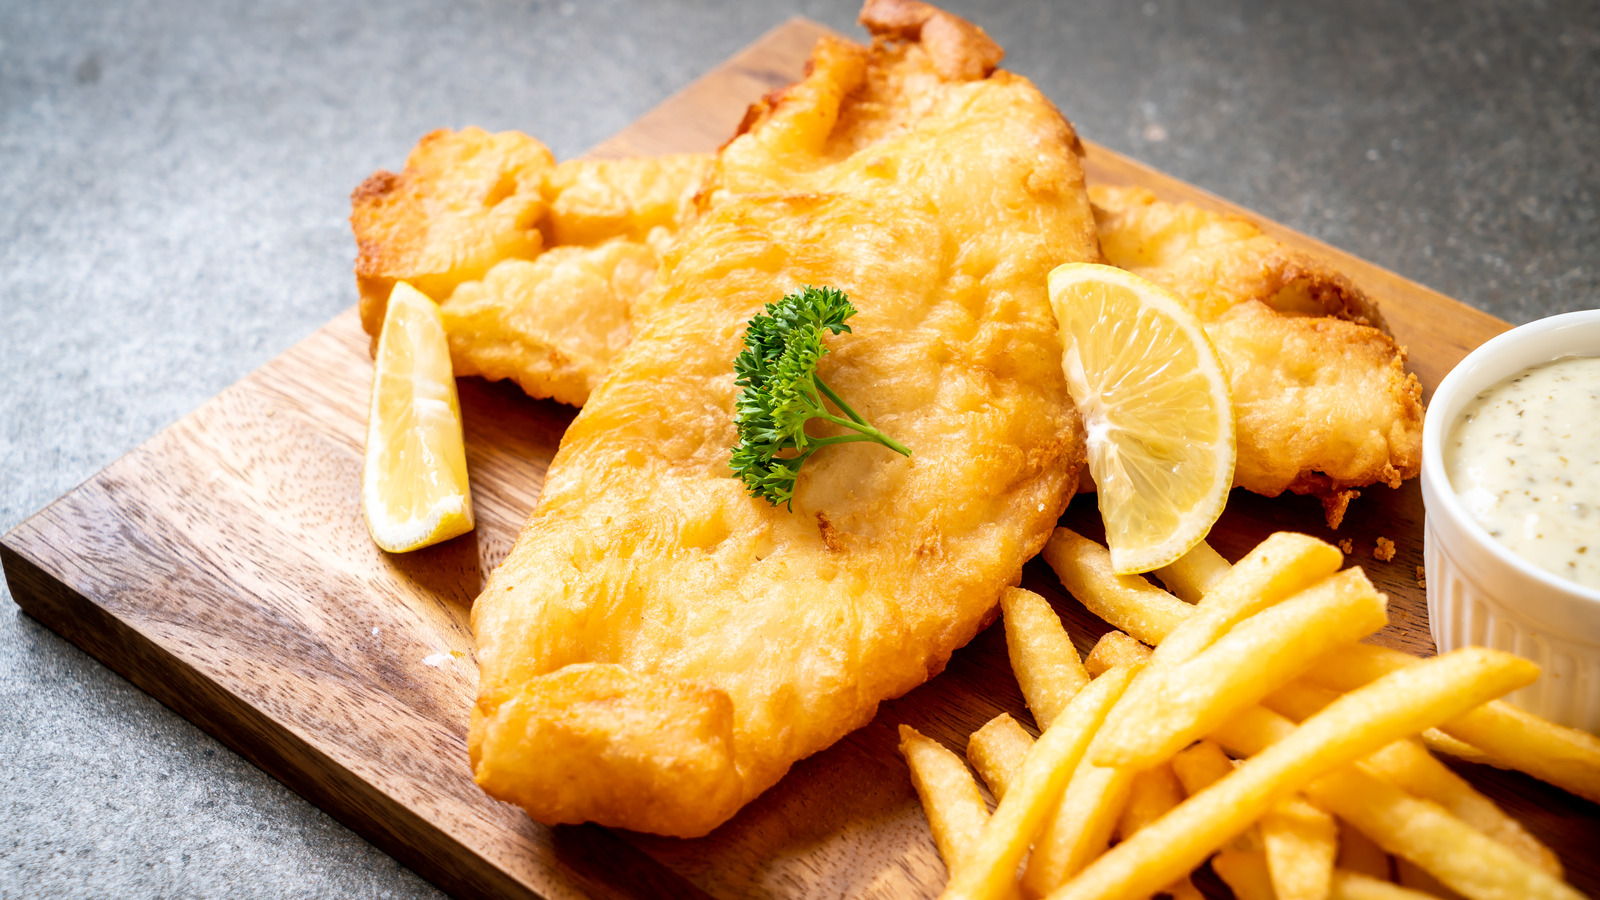 Best Fish And Chips Restaurants You Can Find In The US